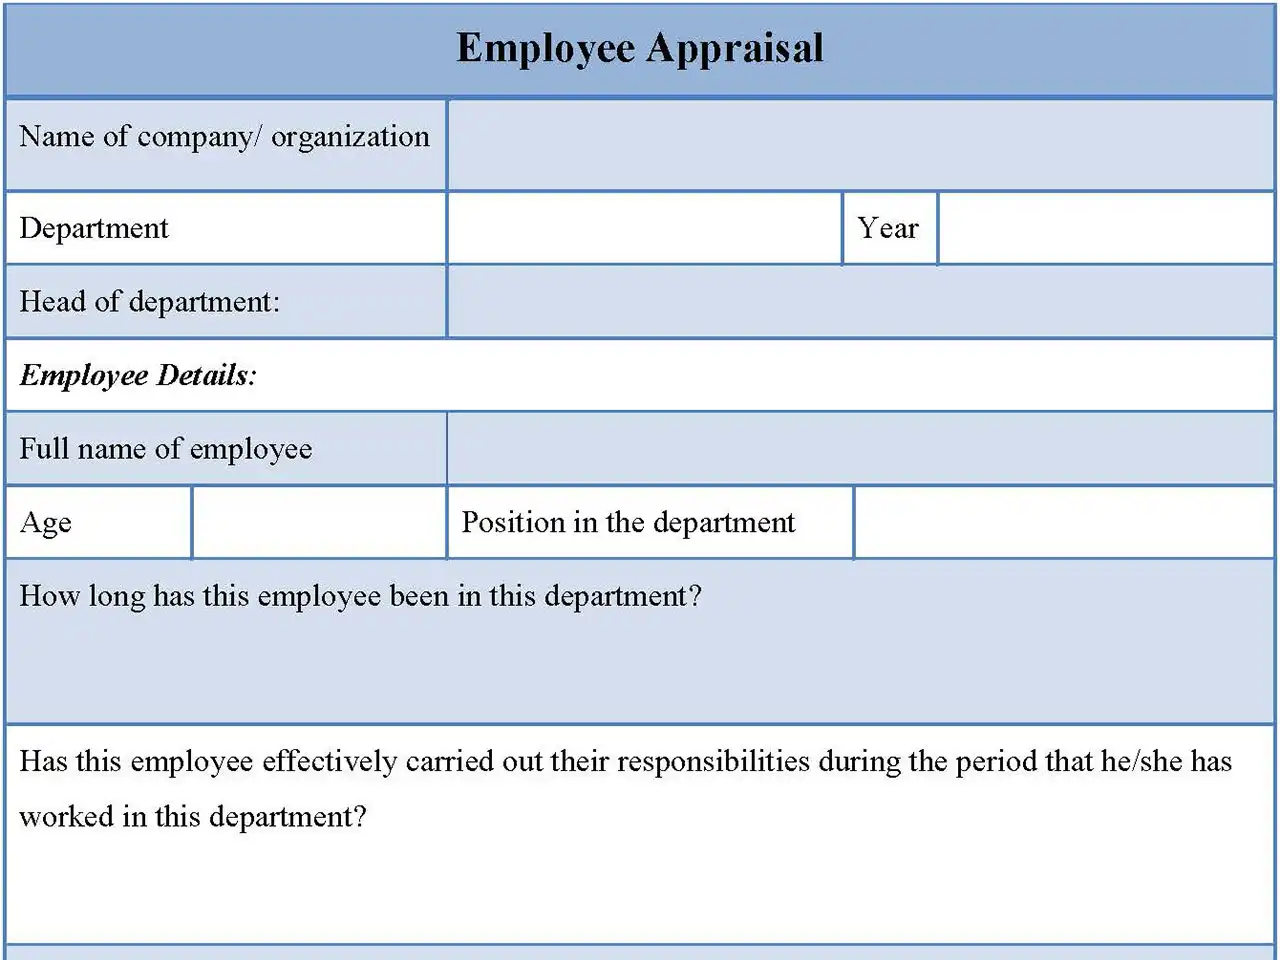 Employee Appraisal Fillable PDF Form And Word Document